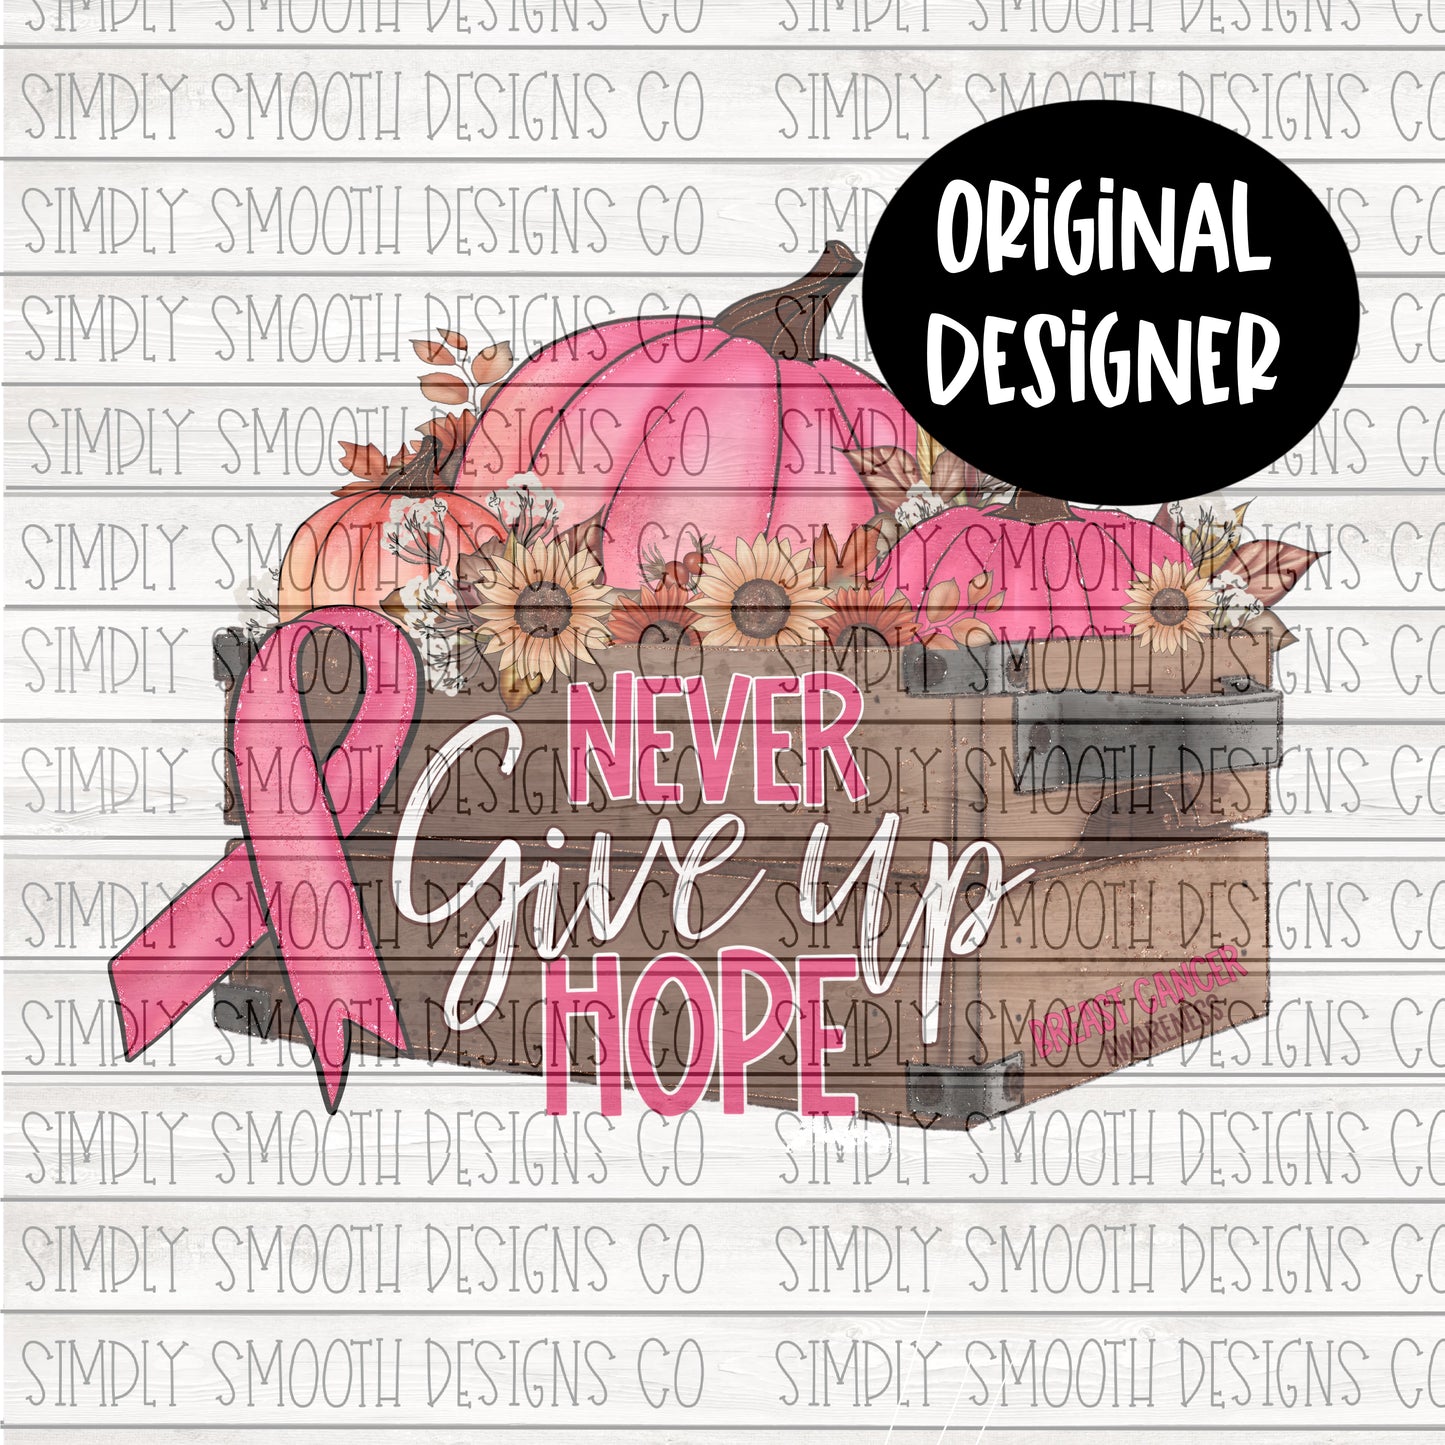 Never give up hope fall breast cancer awareness